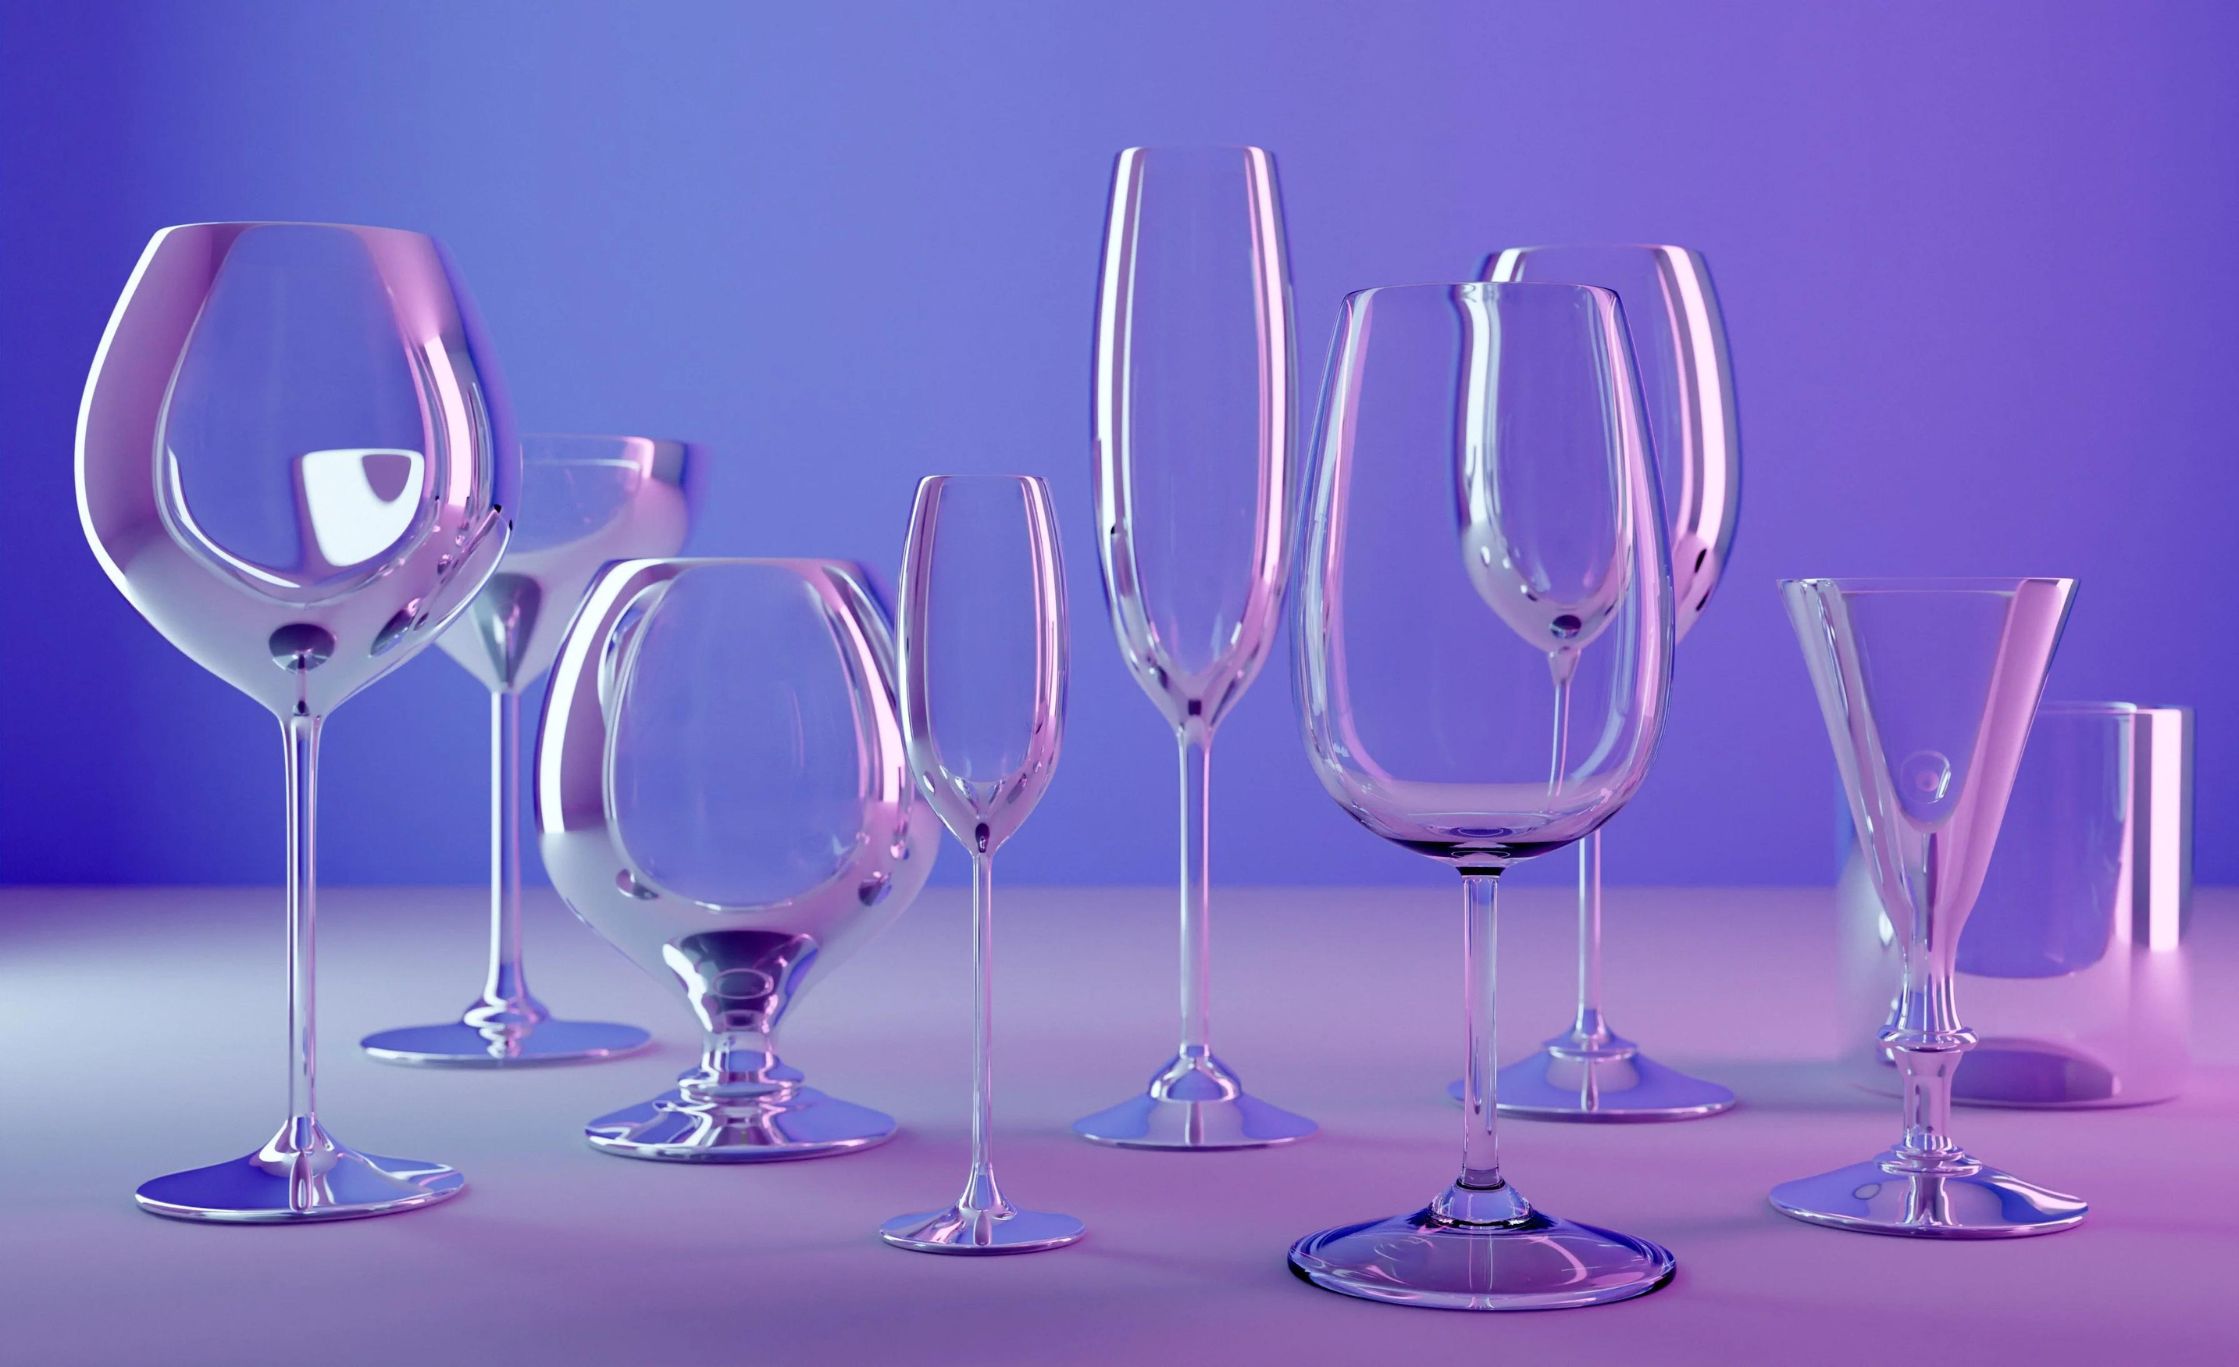 How Cold Does The Ambient Air Need To Be For Glass Crystal Stemware To Break?